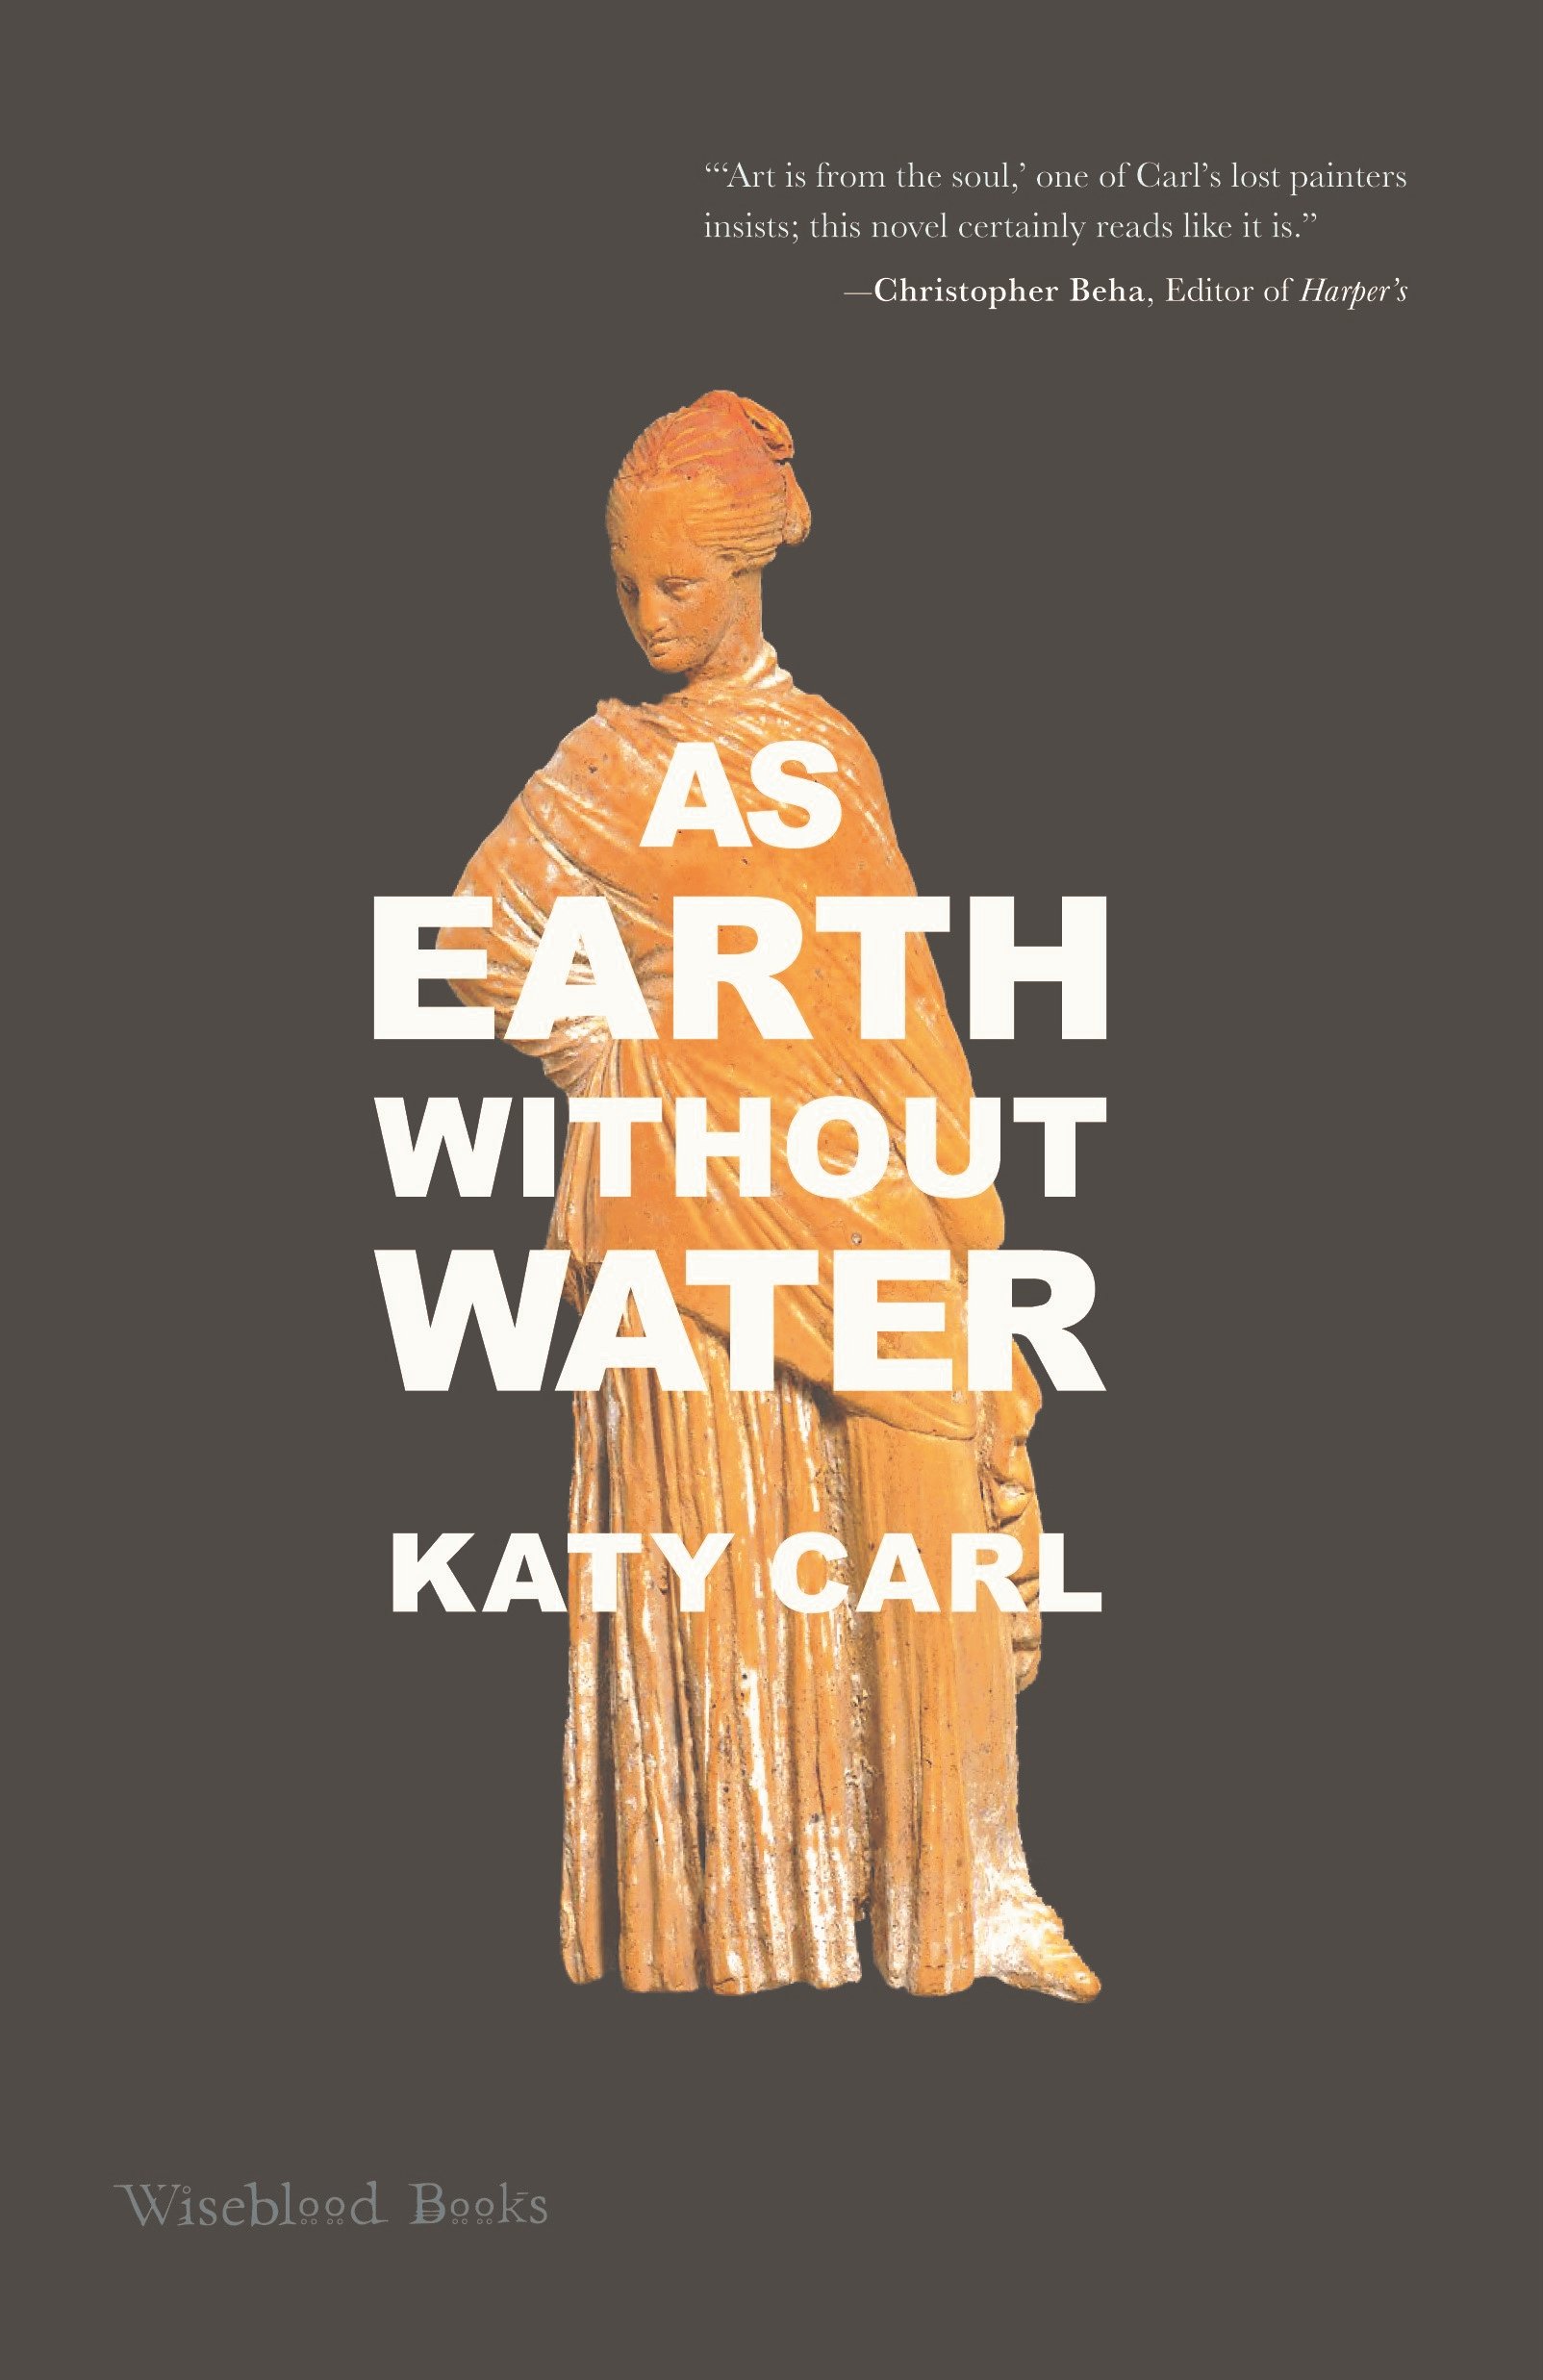 As-earth-without-water-final-front1a